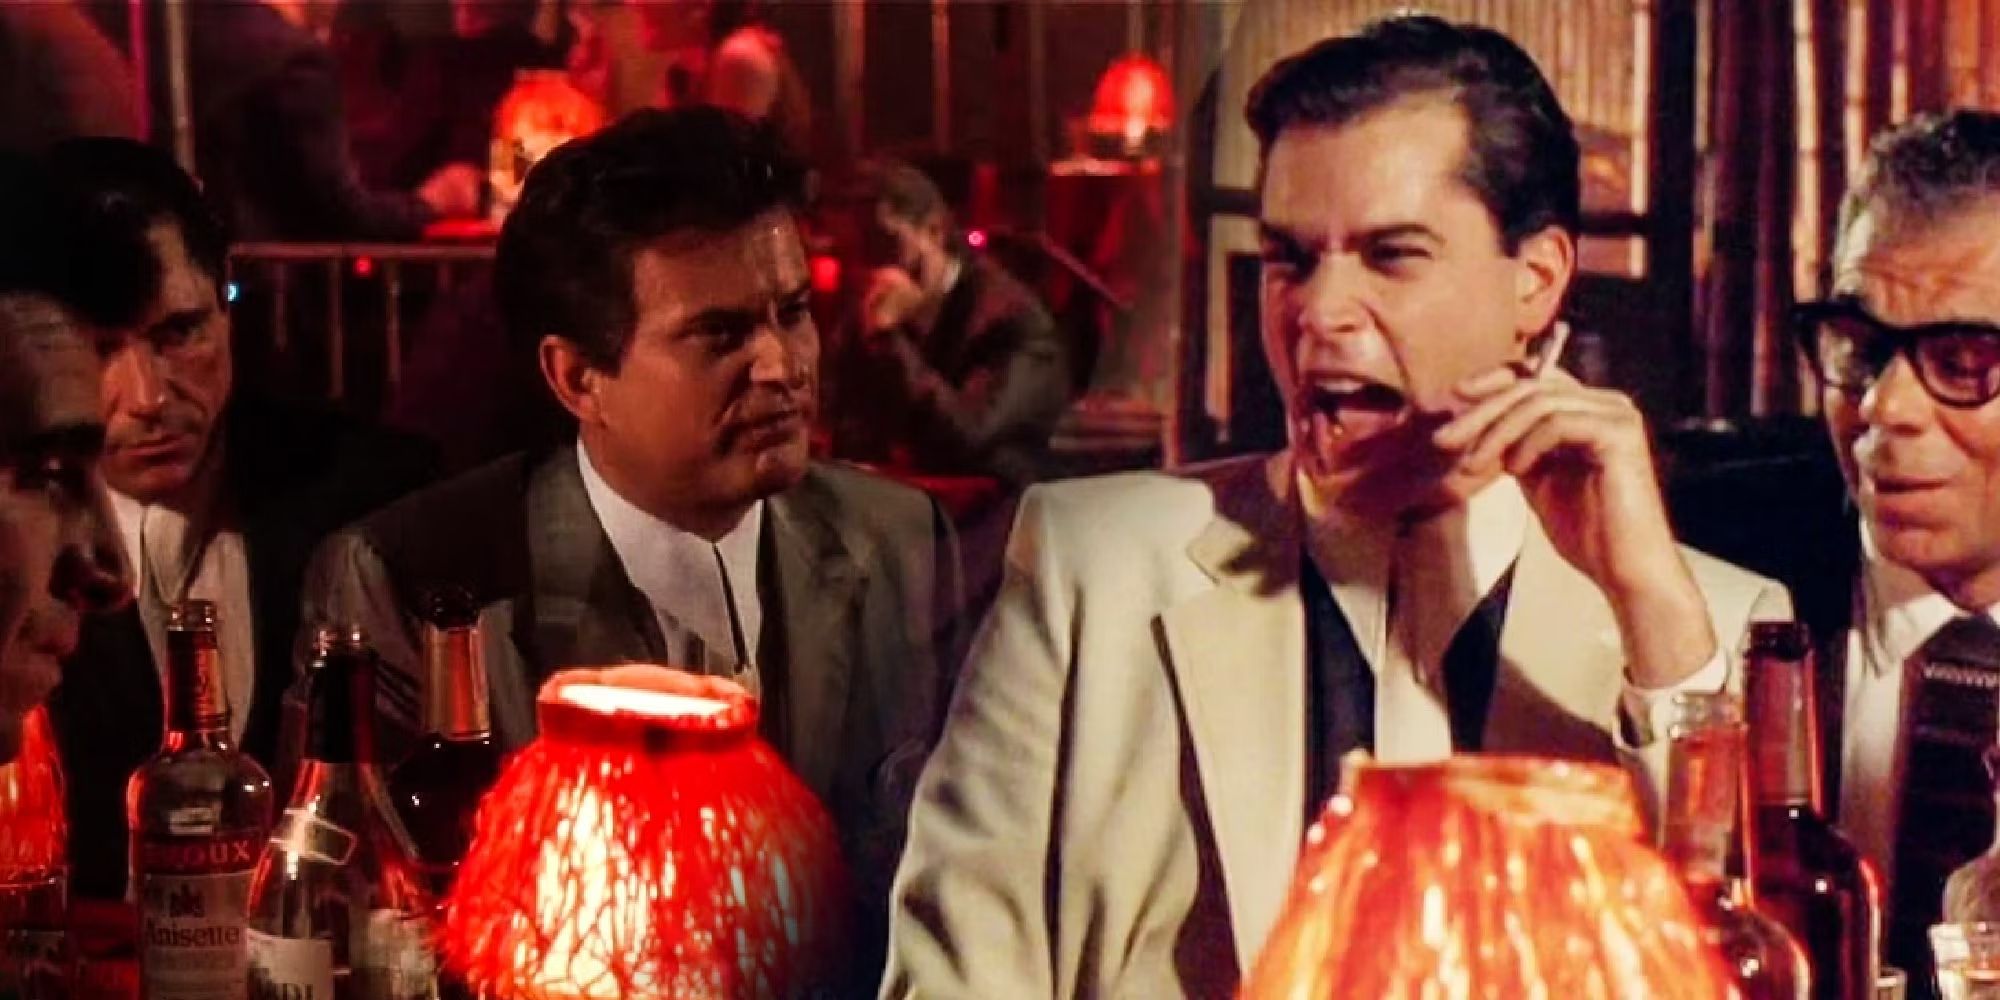 A still from the iconic restaurant scene in Goodfellas.